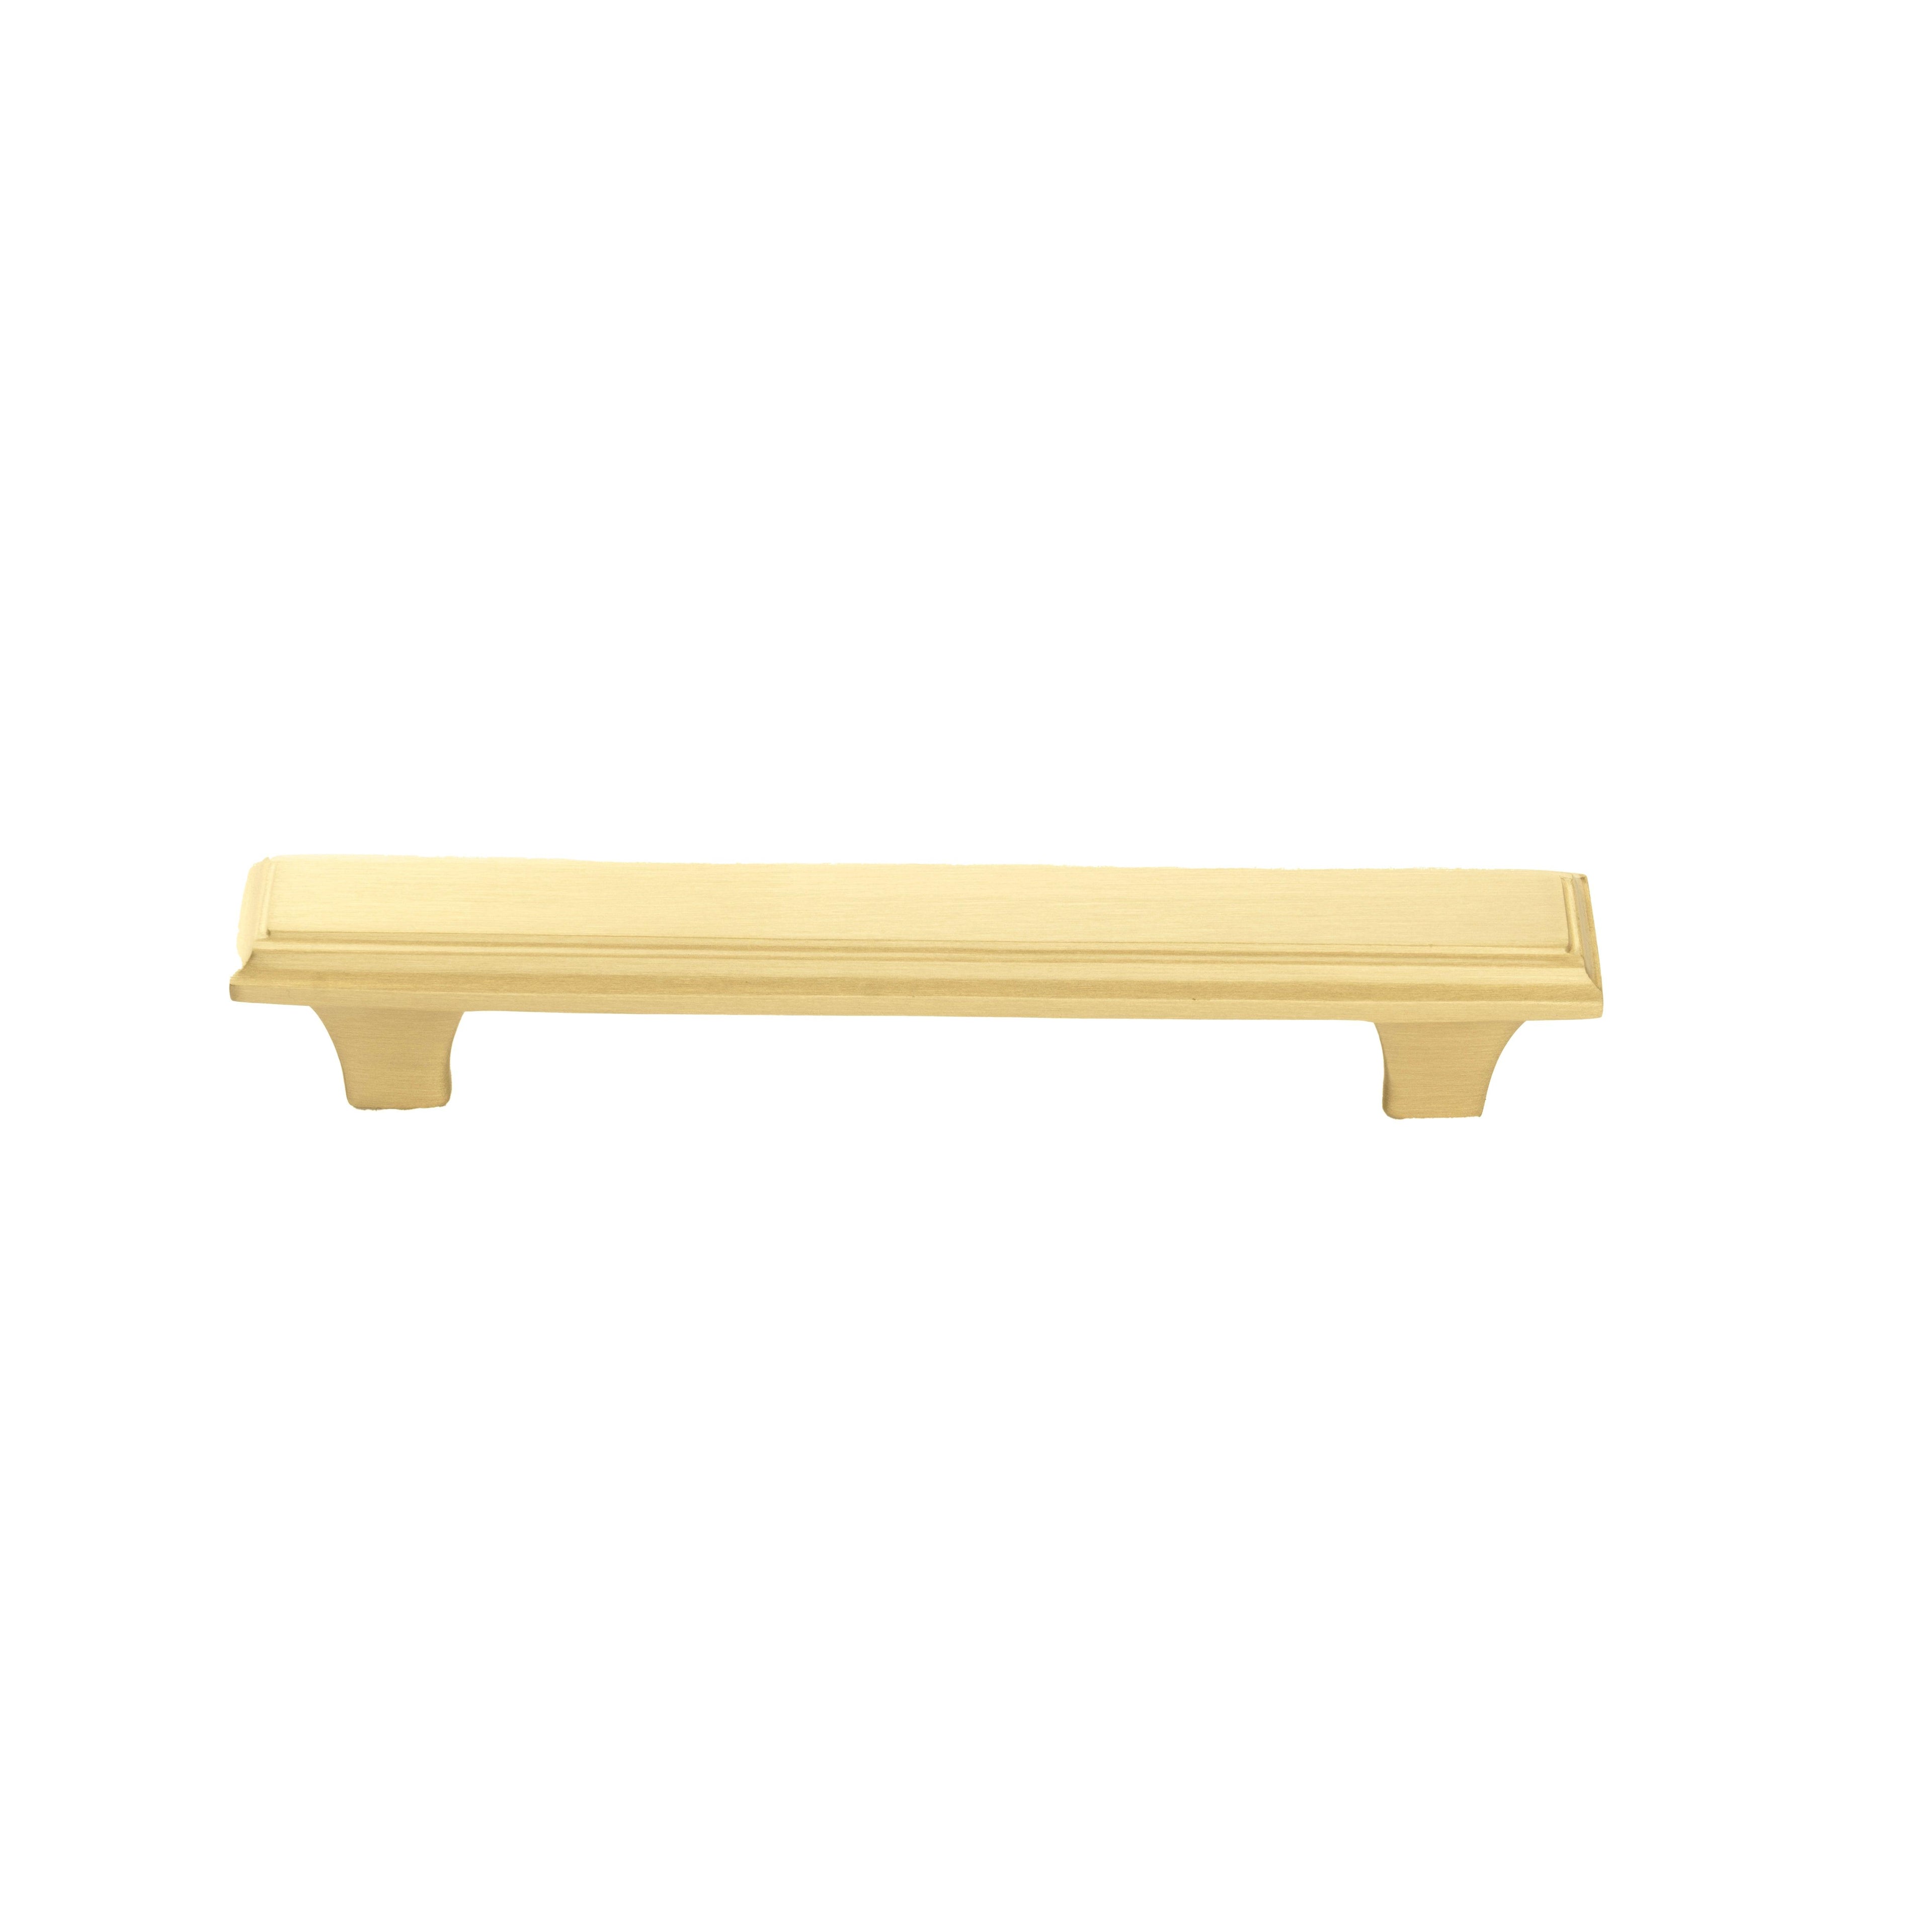 Alaric Handle Handles 123mm / Gold / Brass - M A N T A R A